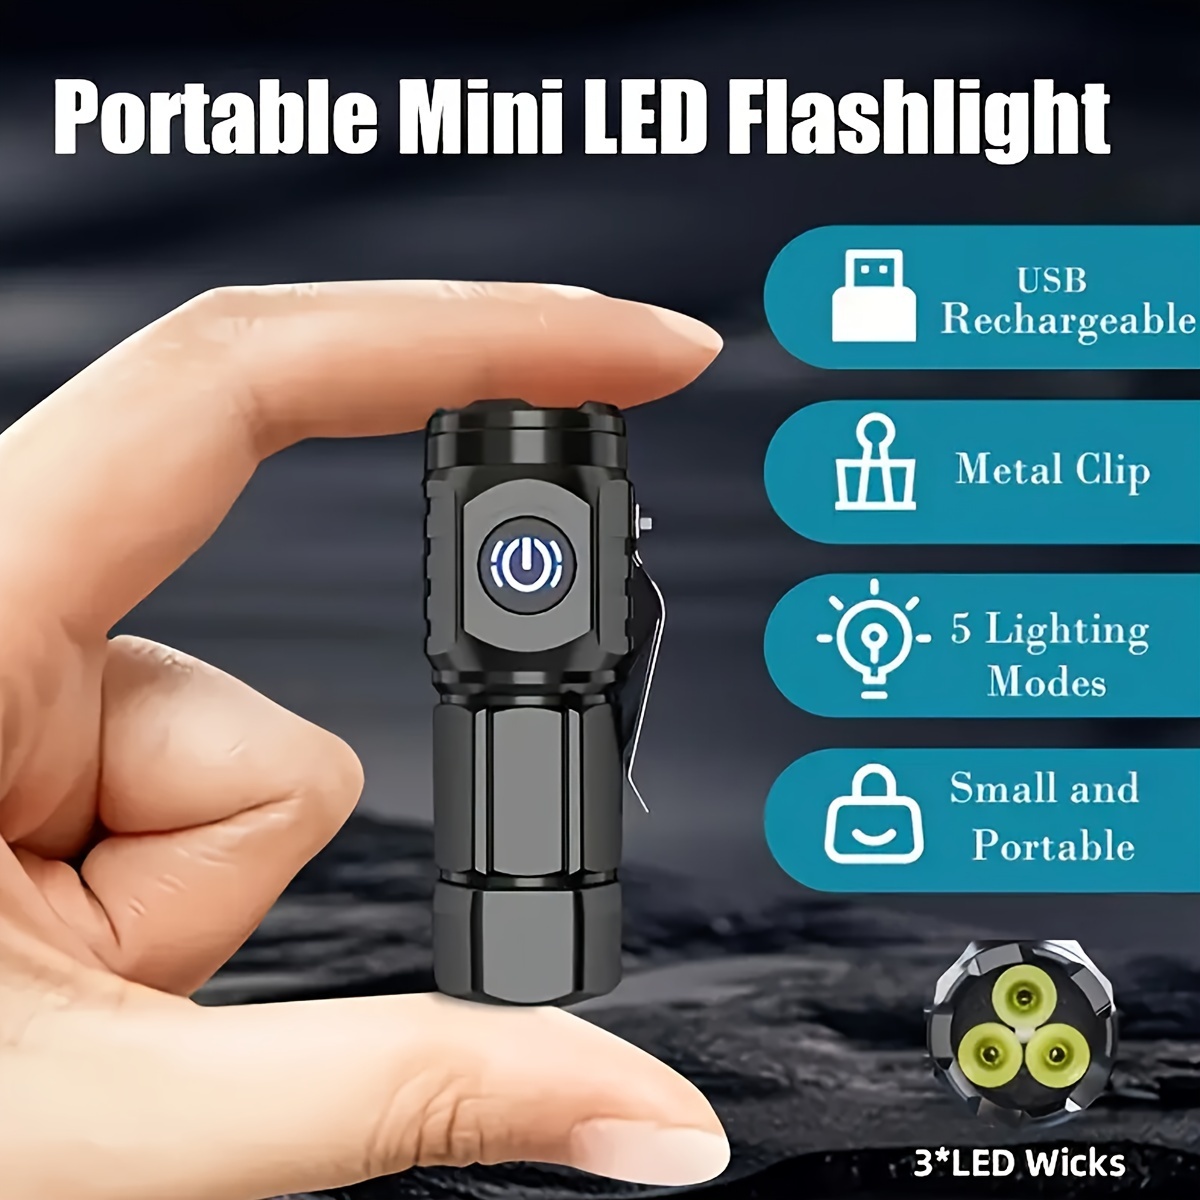 

Ultra-bright Mini Led Flashlight - Usb Rechargeable With 5 Lighting Modes, Durable & Bright For Outdoor Adventures, Camping, Hiking & Car Emergencies